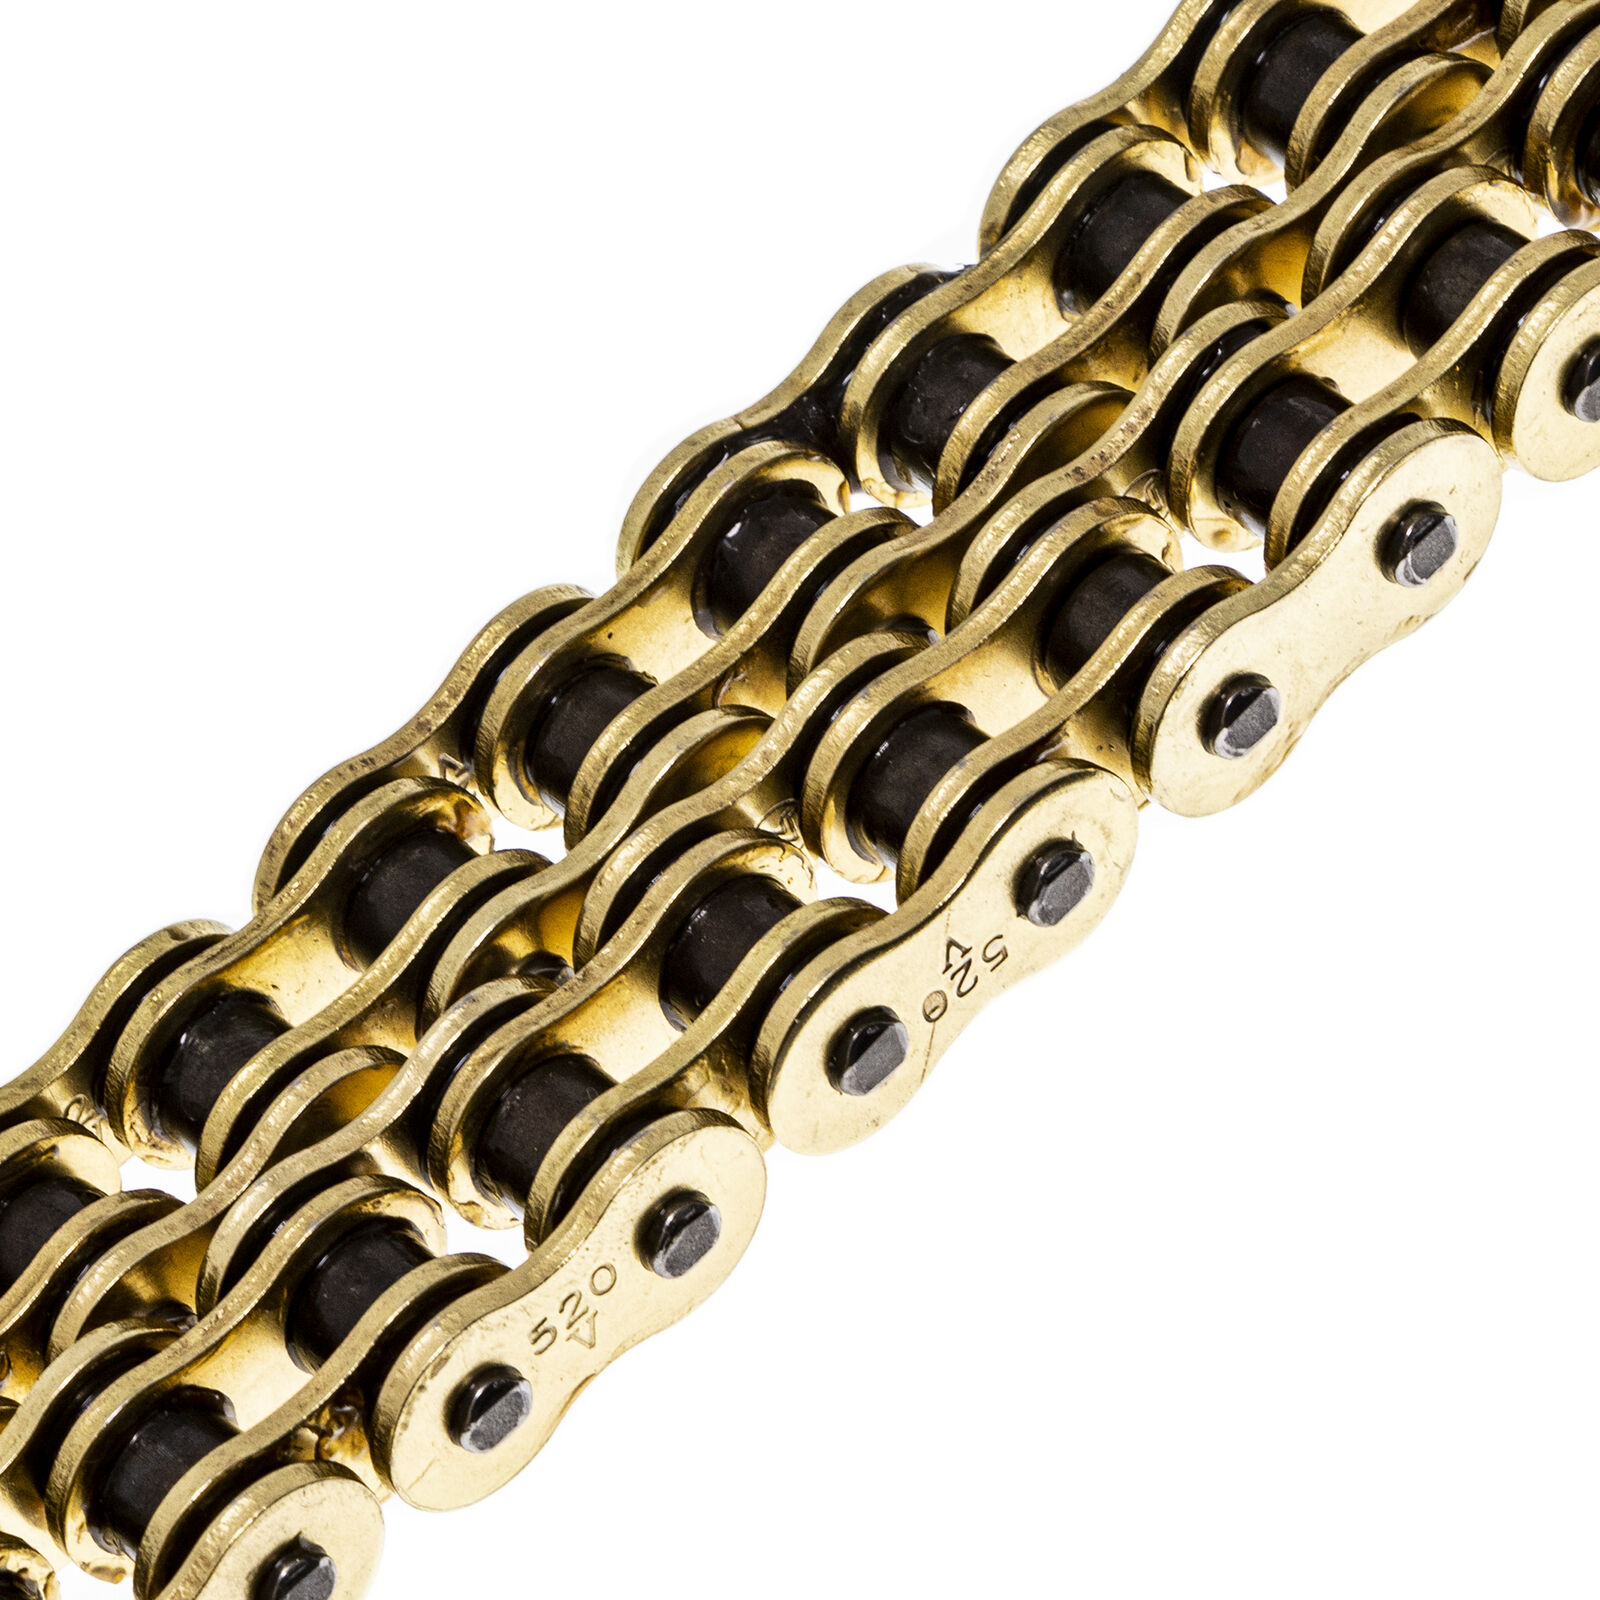 NICHE Gold 520 X-Ring Chain 120 Links With Connecting Master Link Motorcycle